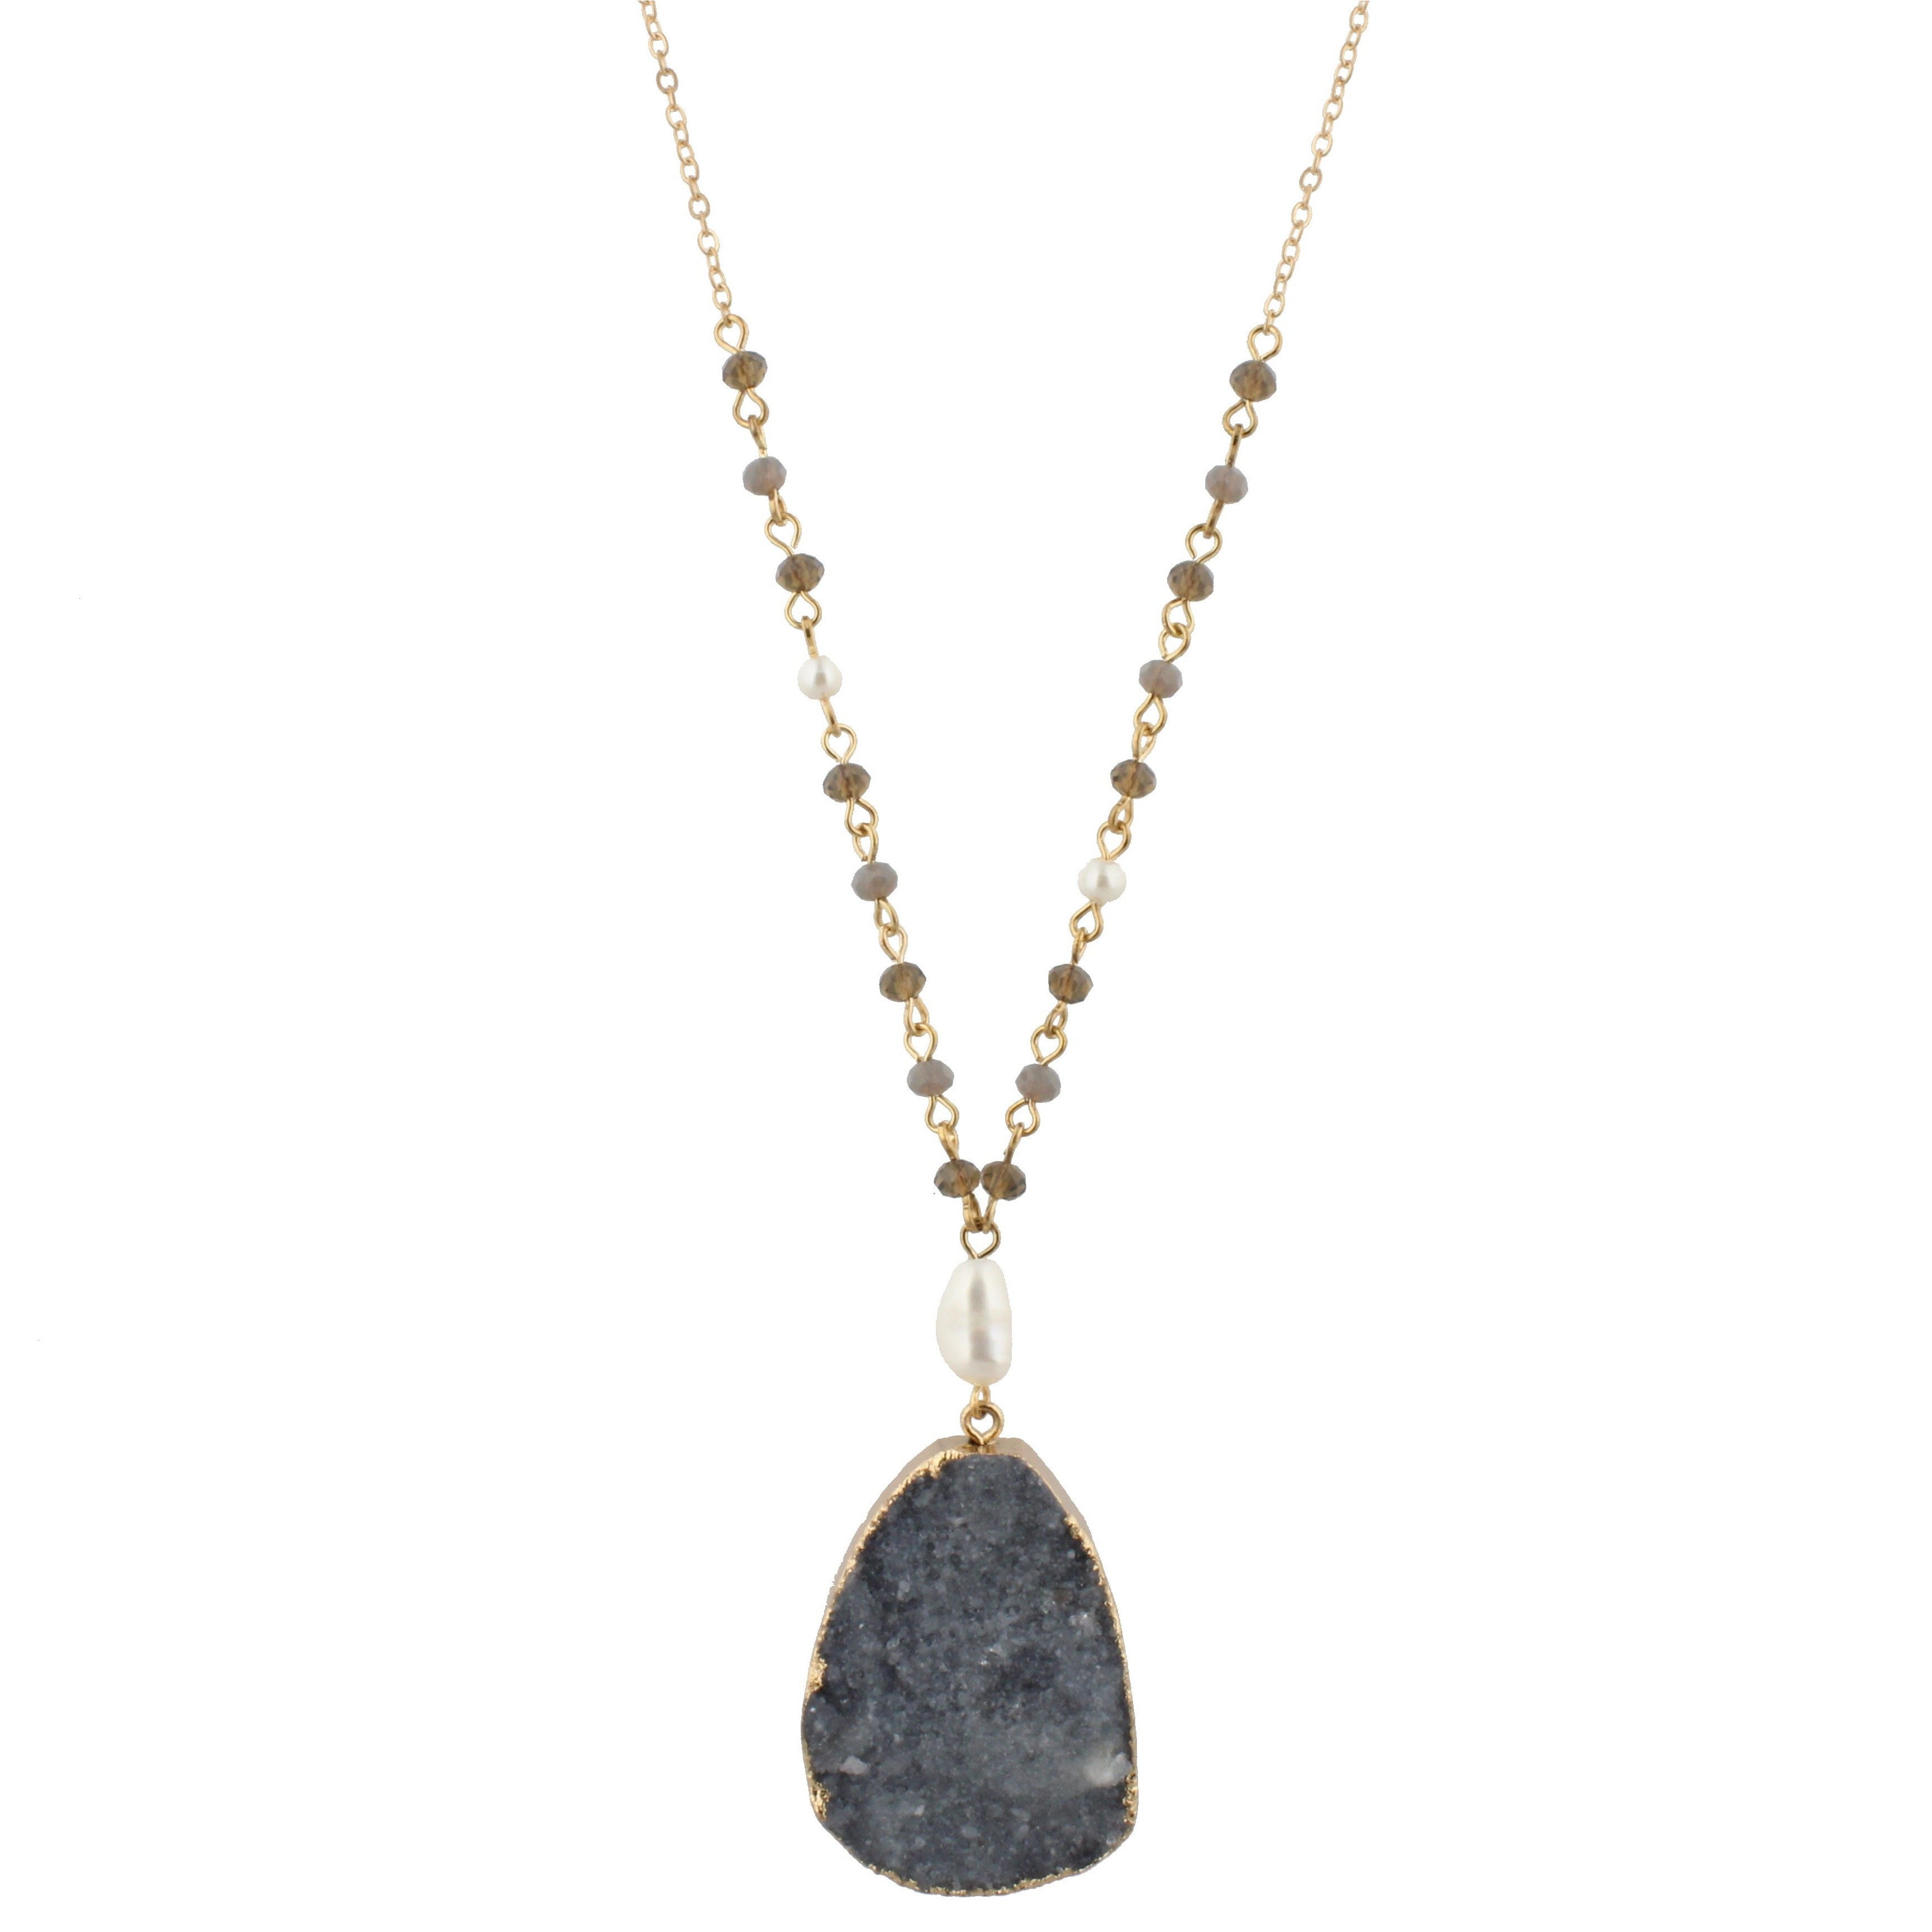 Jane Marie Partially Linked Beaded Body & Stone Pendant Necklace